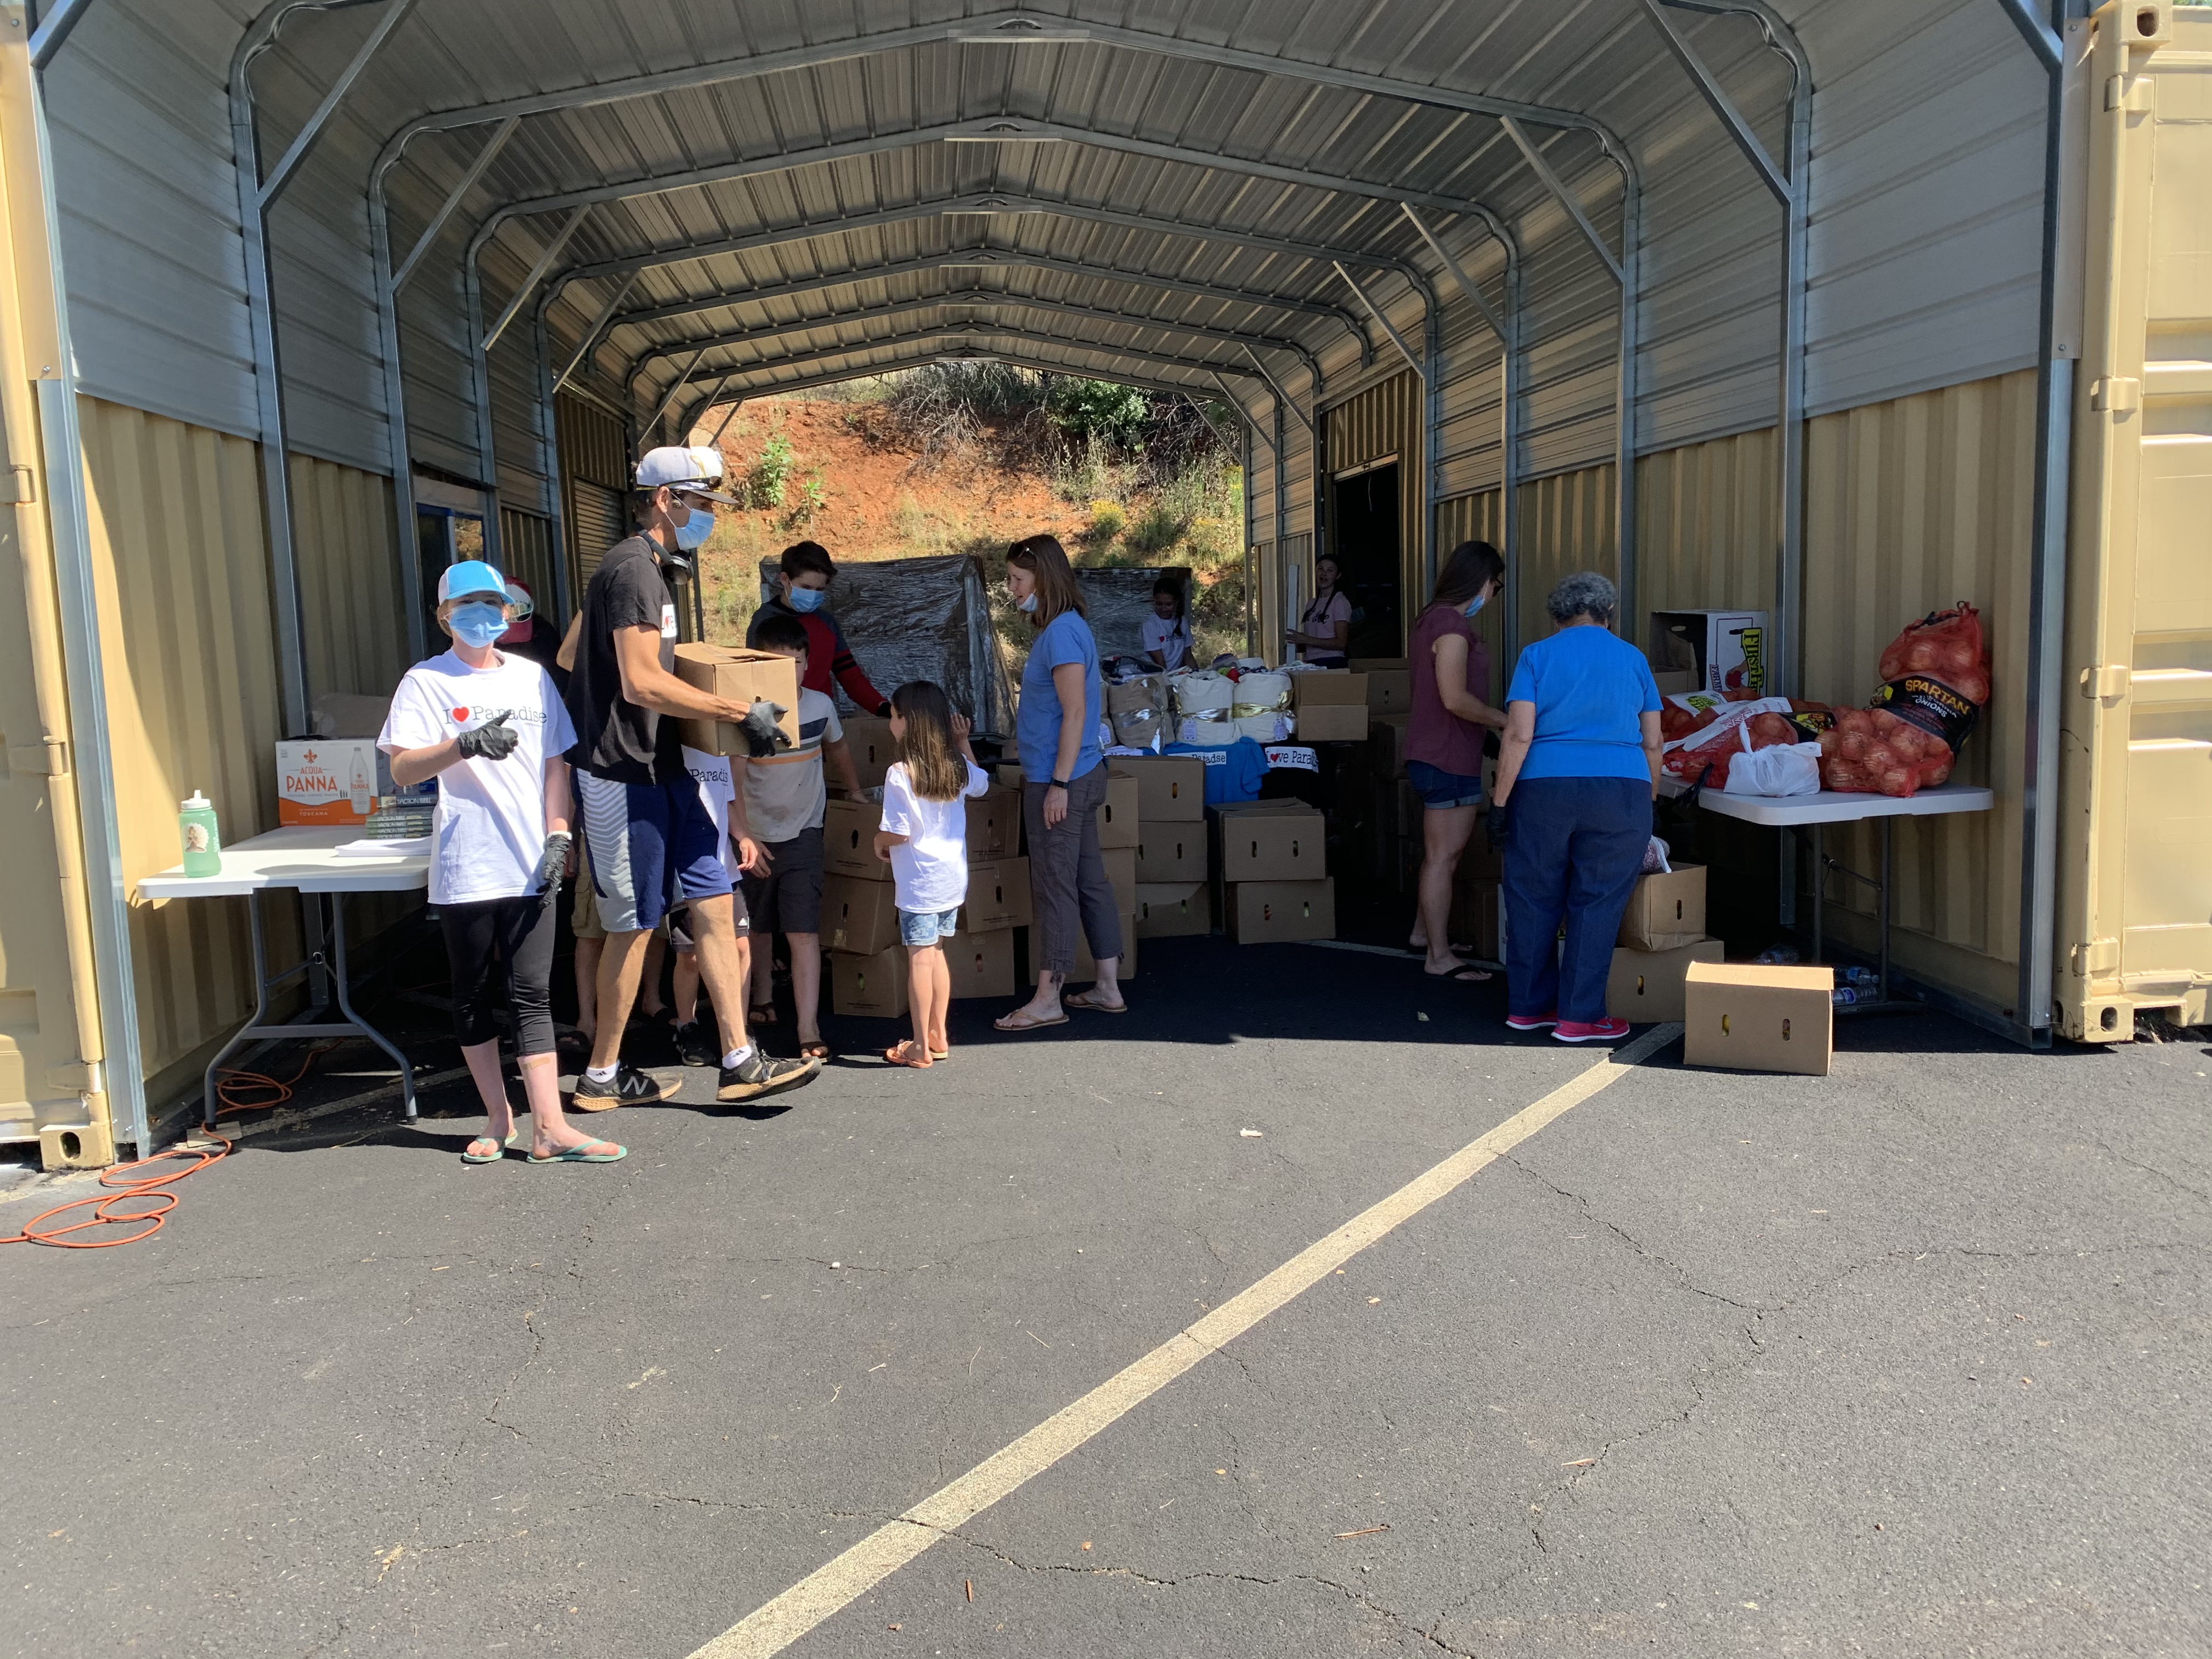 On Tuesdays, families work together filling and delivering boxes of food. Grateful to get out of the house at a safe outreach, they serve others each week during the COVID-19 shelter in place.  